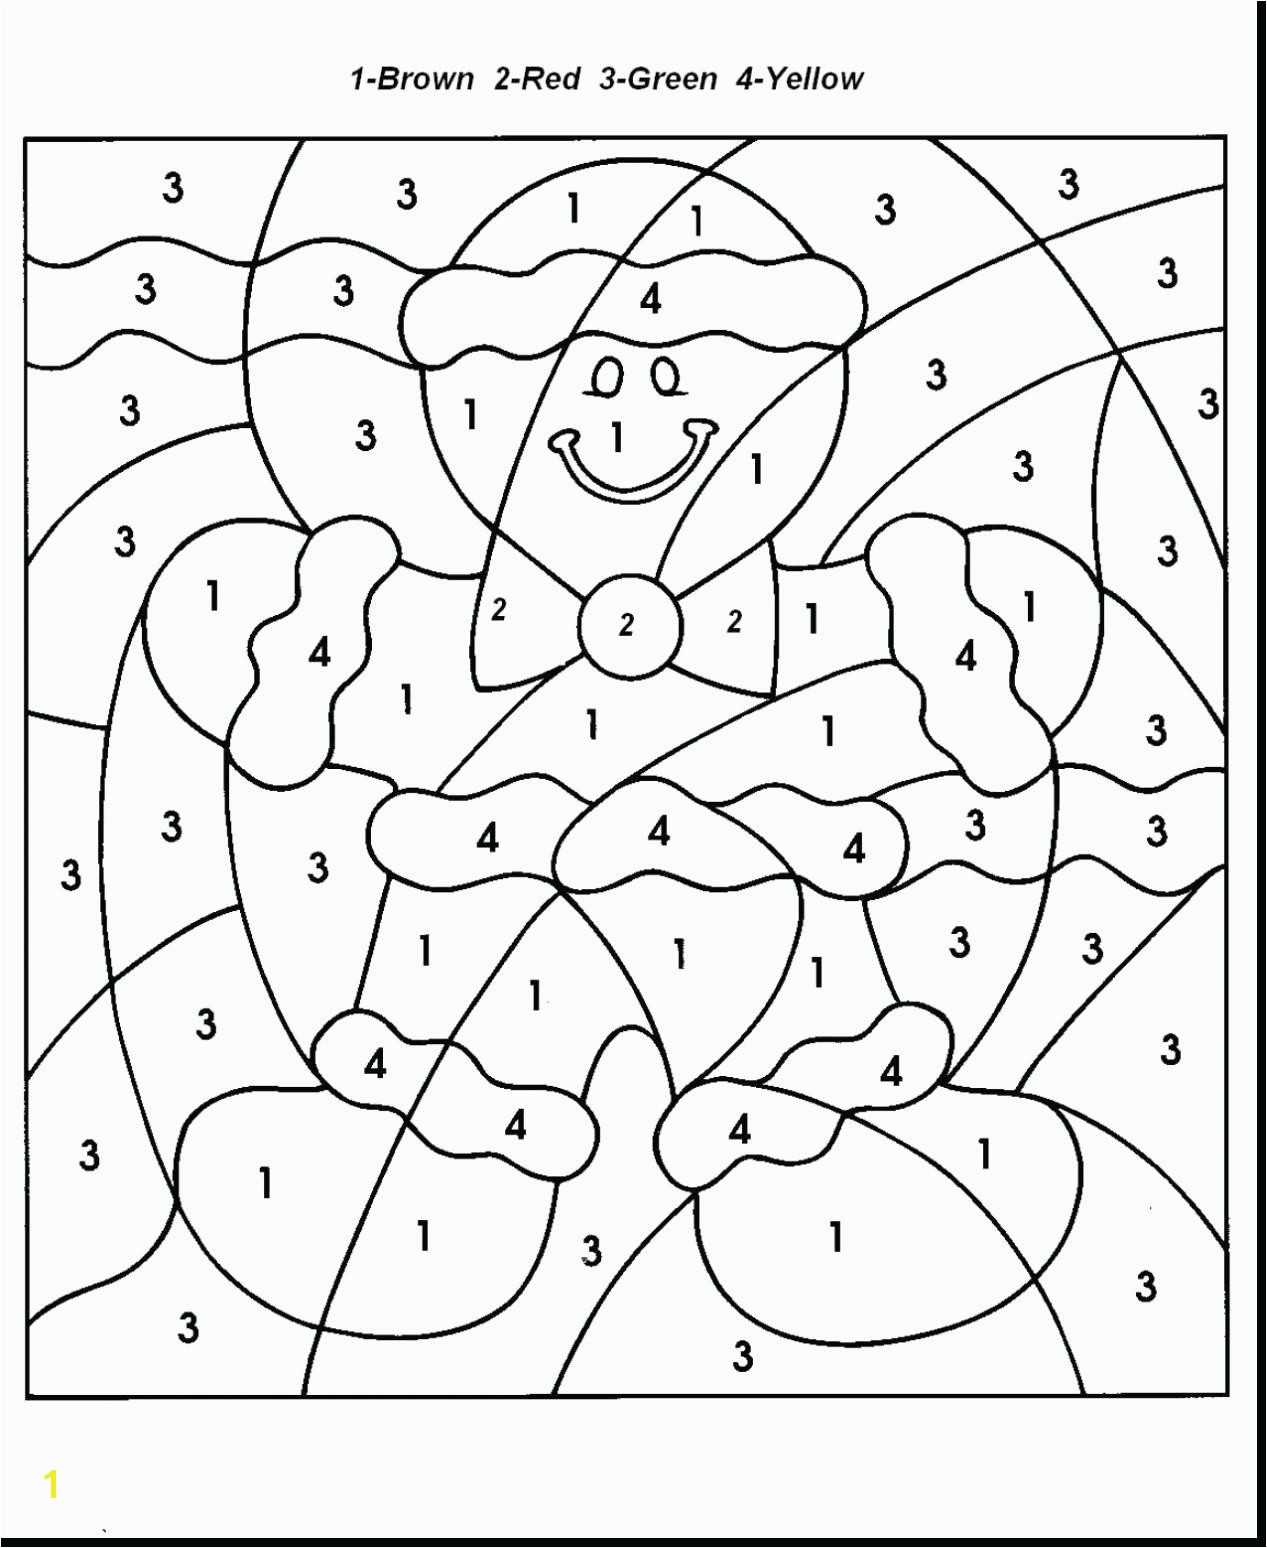 Inspiring Coloring Pages For 7Th Graders Easy 3Rd Halloween 3rd Grade Copy Math